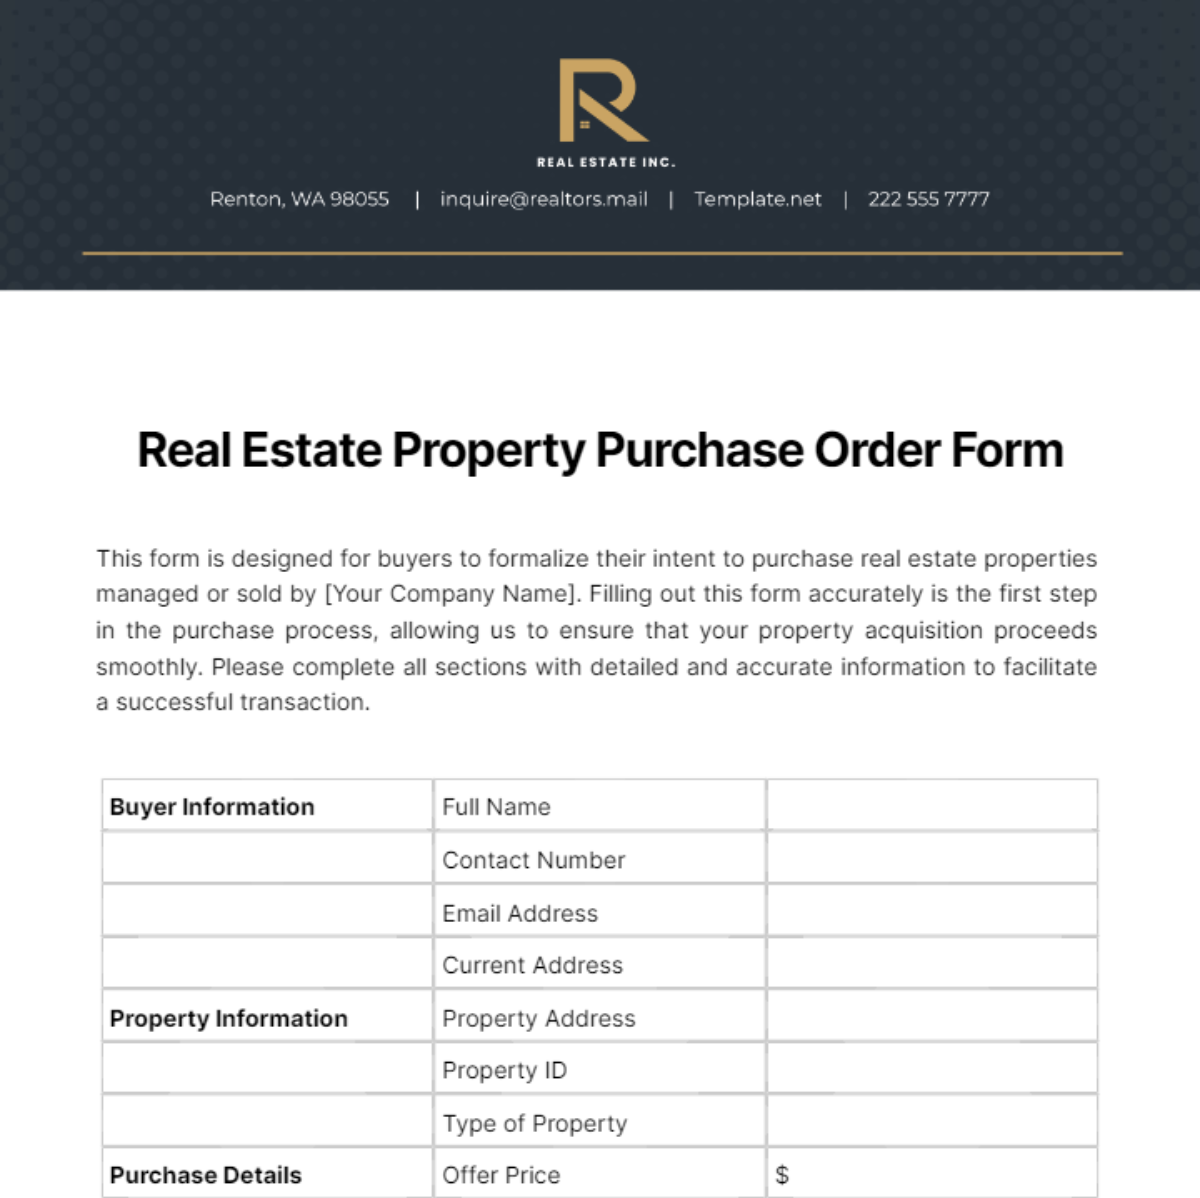 Real Estate Property Purchase Order Form Template